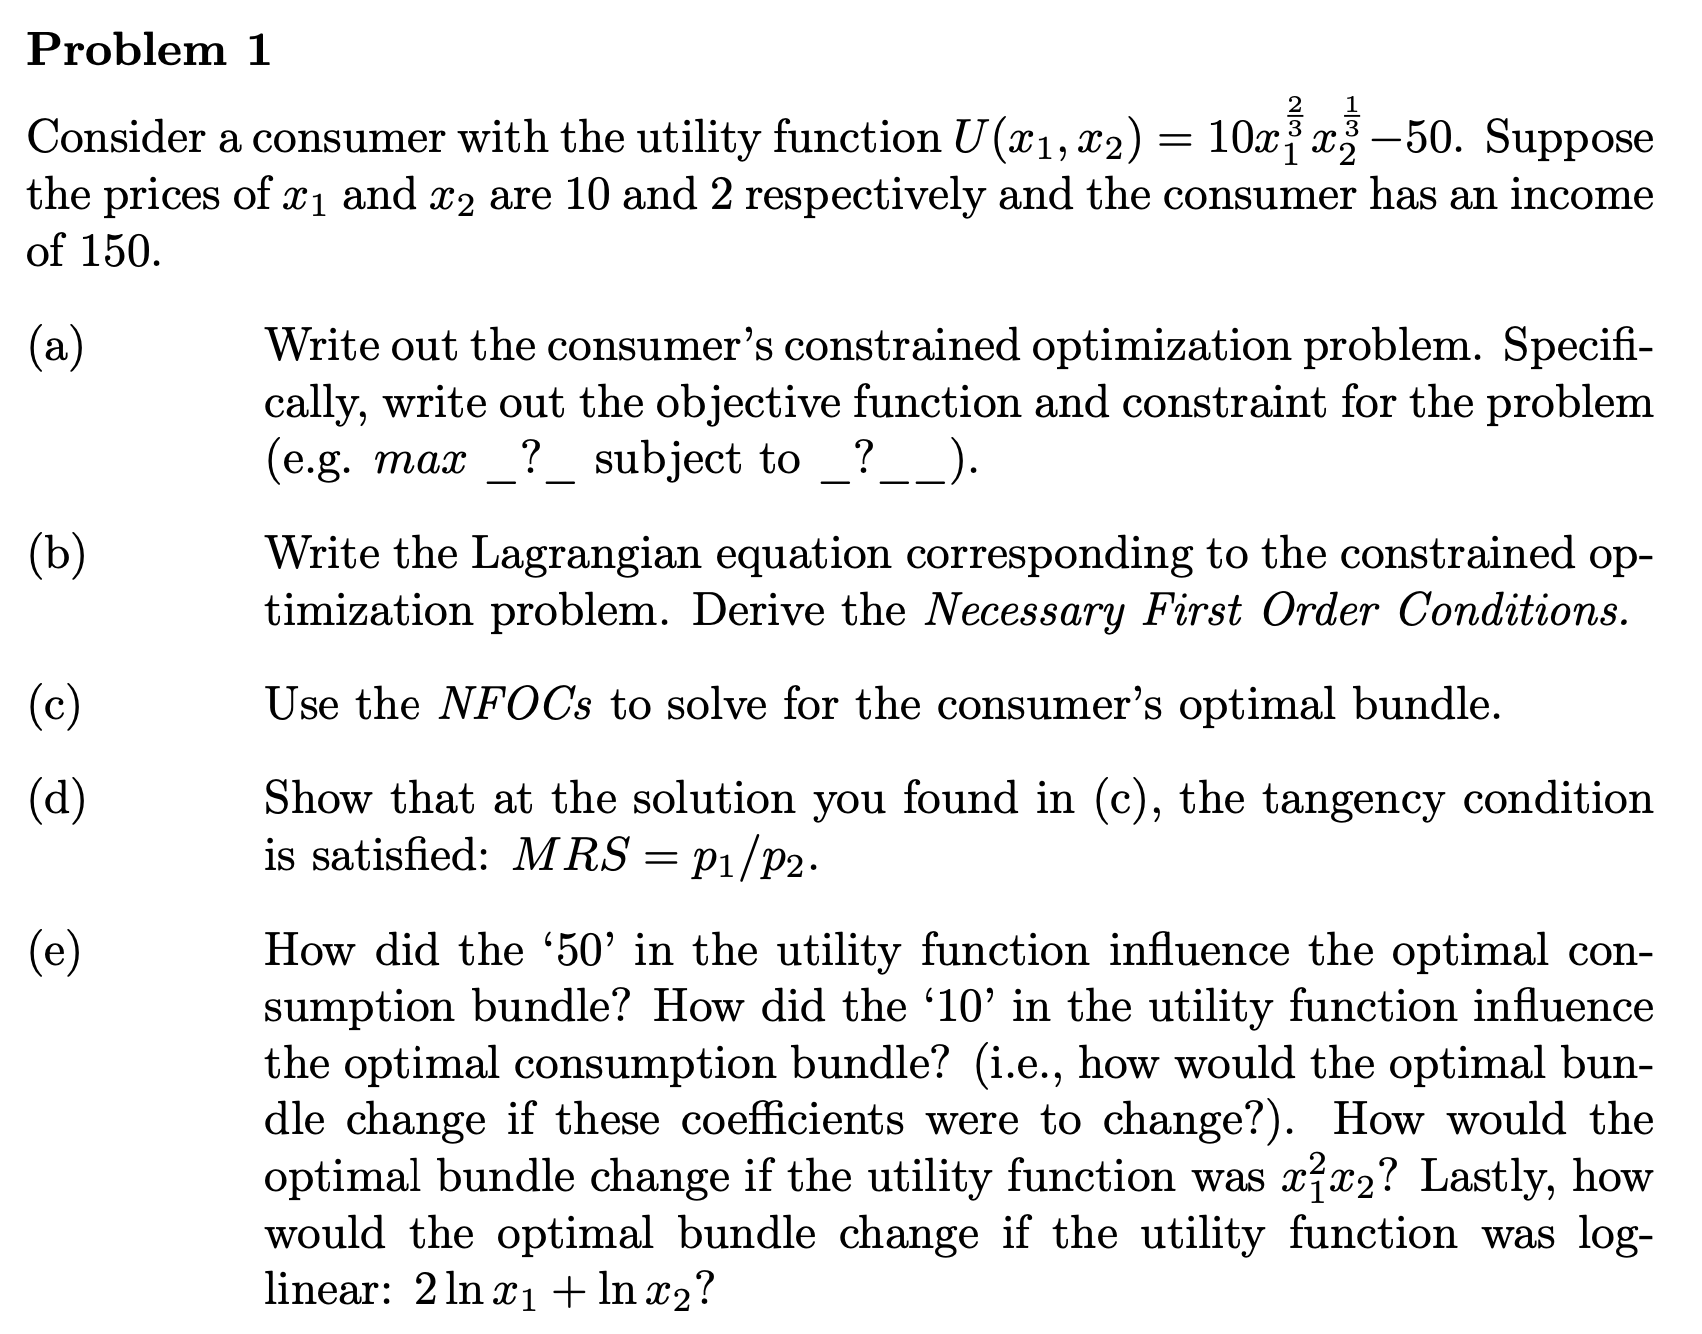 Show that at the solution you found in (c), the tangency condition
is satisfied: M RS = p1/p2.
(d)
(e)
How did the '50' in the utility function influence the optimal con-
sumption bundle? How did the '10' in the utility function influence
the optimal consumption bundle? (i.e., how would the optimal bun-
dle change if these coefficients were to change?). How would the
optimal bundle change if the utility function was xx2? Lastly, how
would the optimal bundle change if the utility function was log-
linear: 2 ln x1+ In x2?
